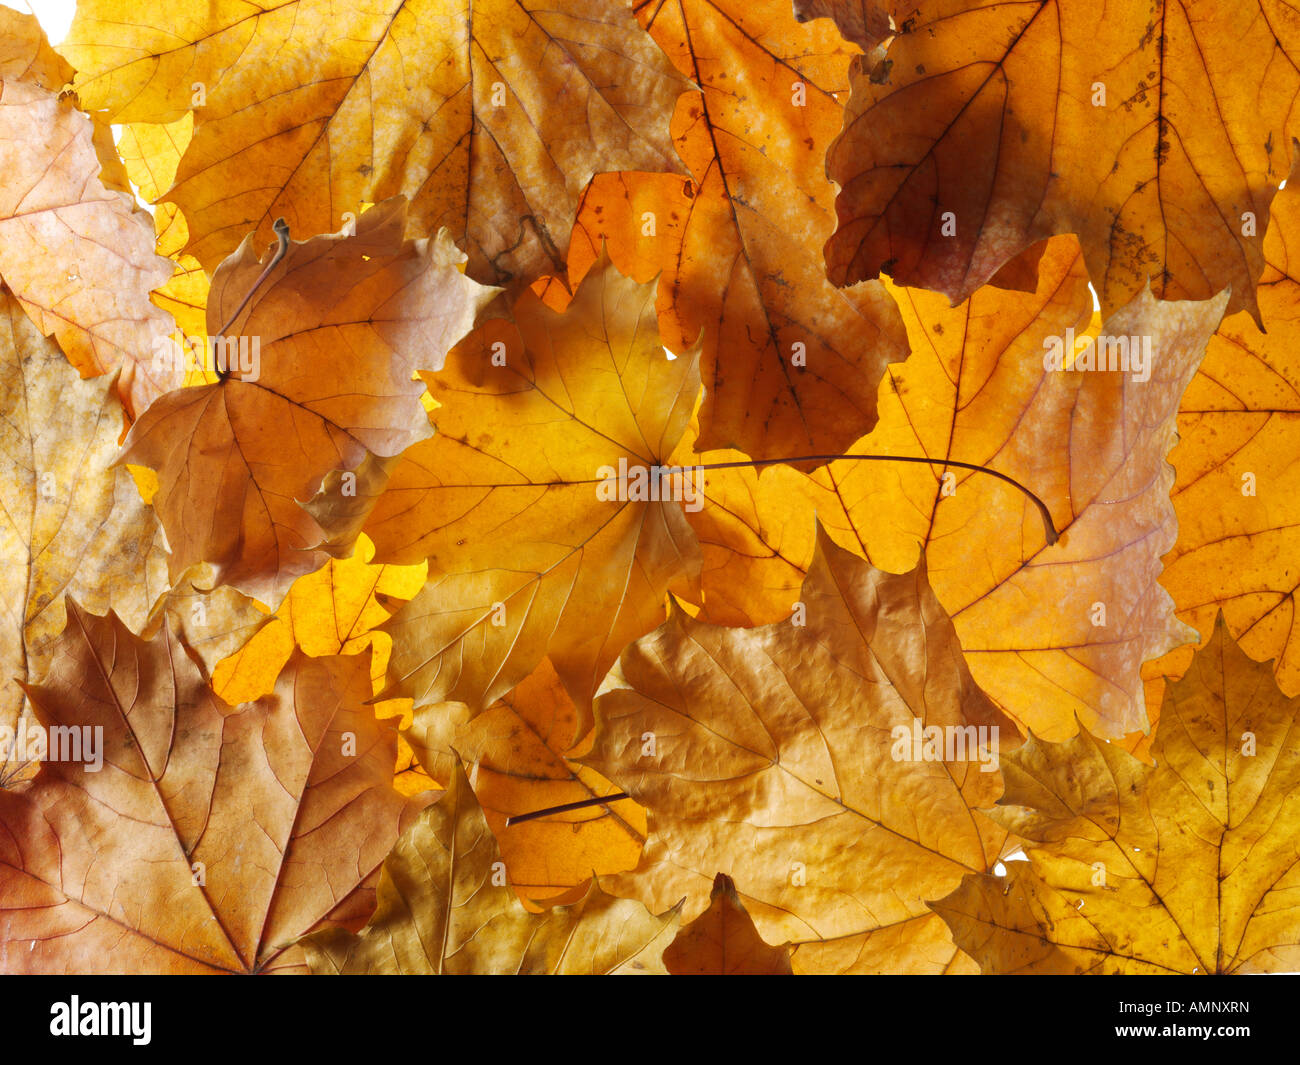 Fallen autumn Fall Leaves  piled on top of each other. Dried colorful leaves with the warm autumnal colors and textures of fall. Stock Photo